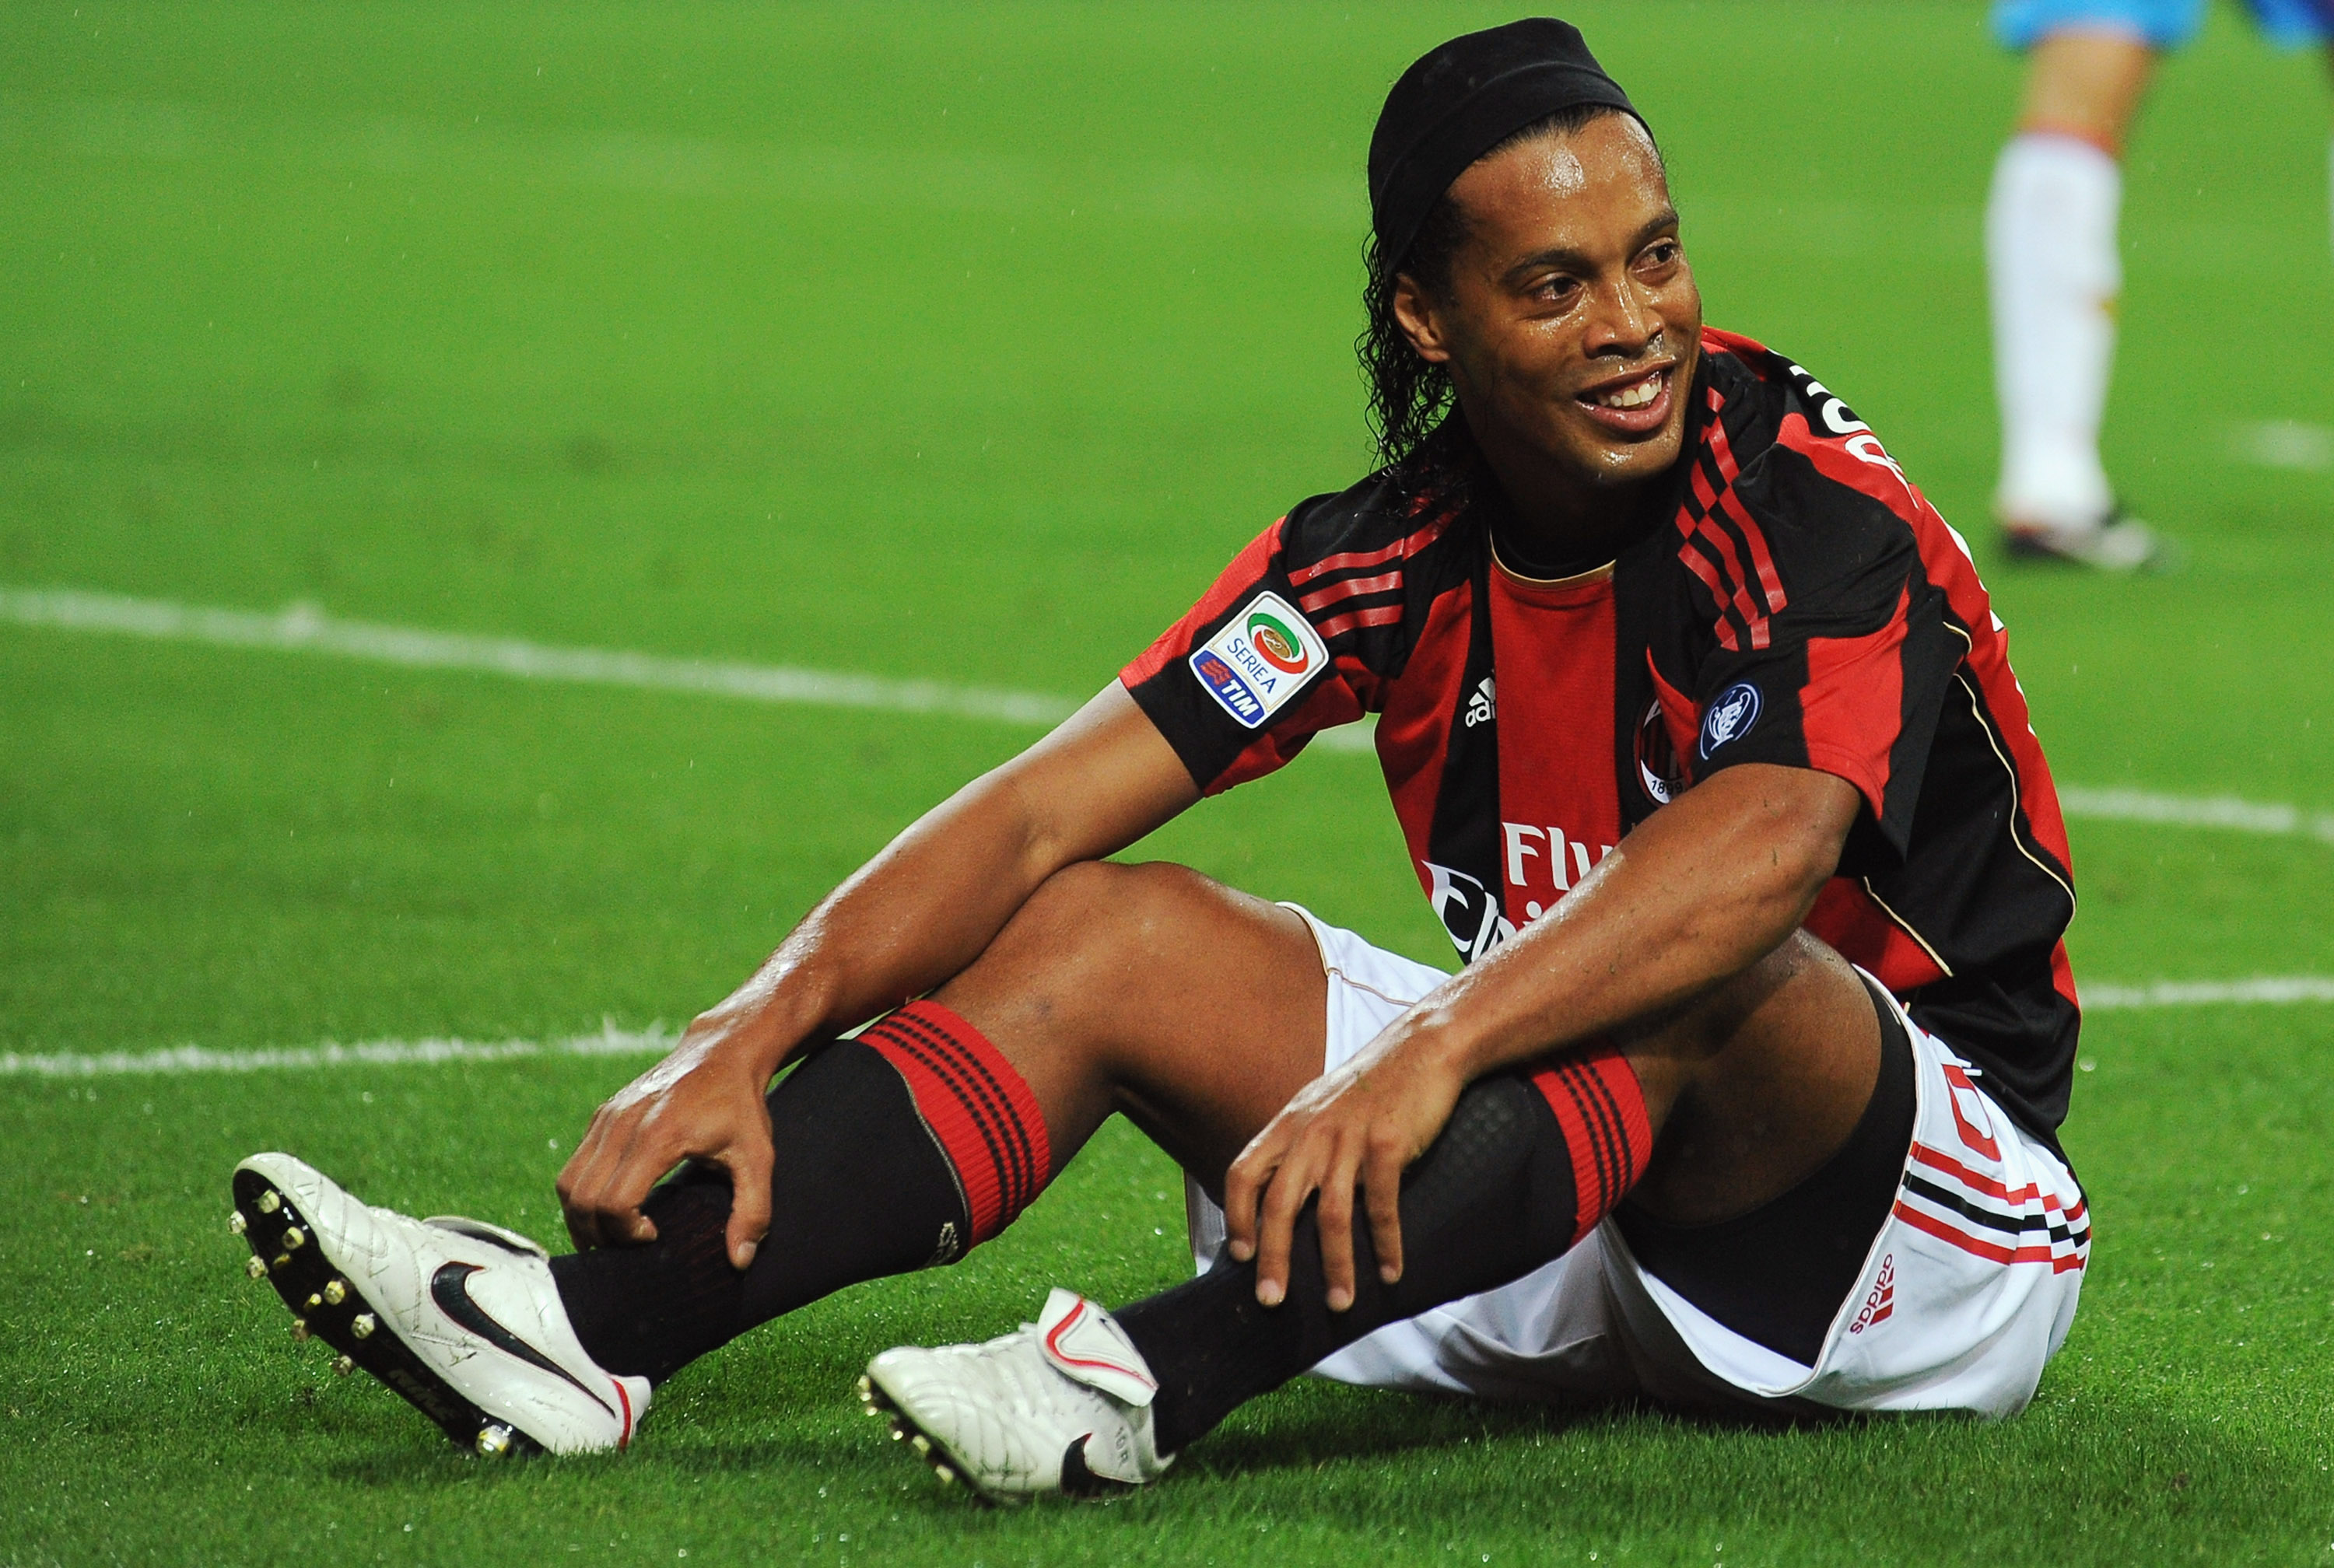 MILAN, ITALY - SEPTEMBER 18:  Ronaldinho of AC Milan smiles during the Serie A match between AC Milan and Catania Calcio at Stadio Giuseppe Meazza on September 18, 2010 in Milan, Italy.  (Photo by Valerio Pennicino/Getty Images)